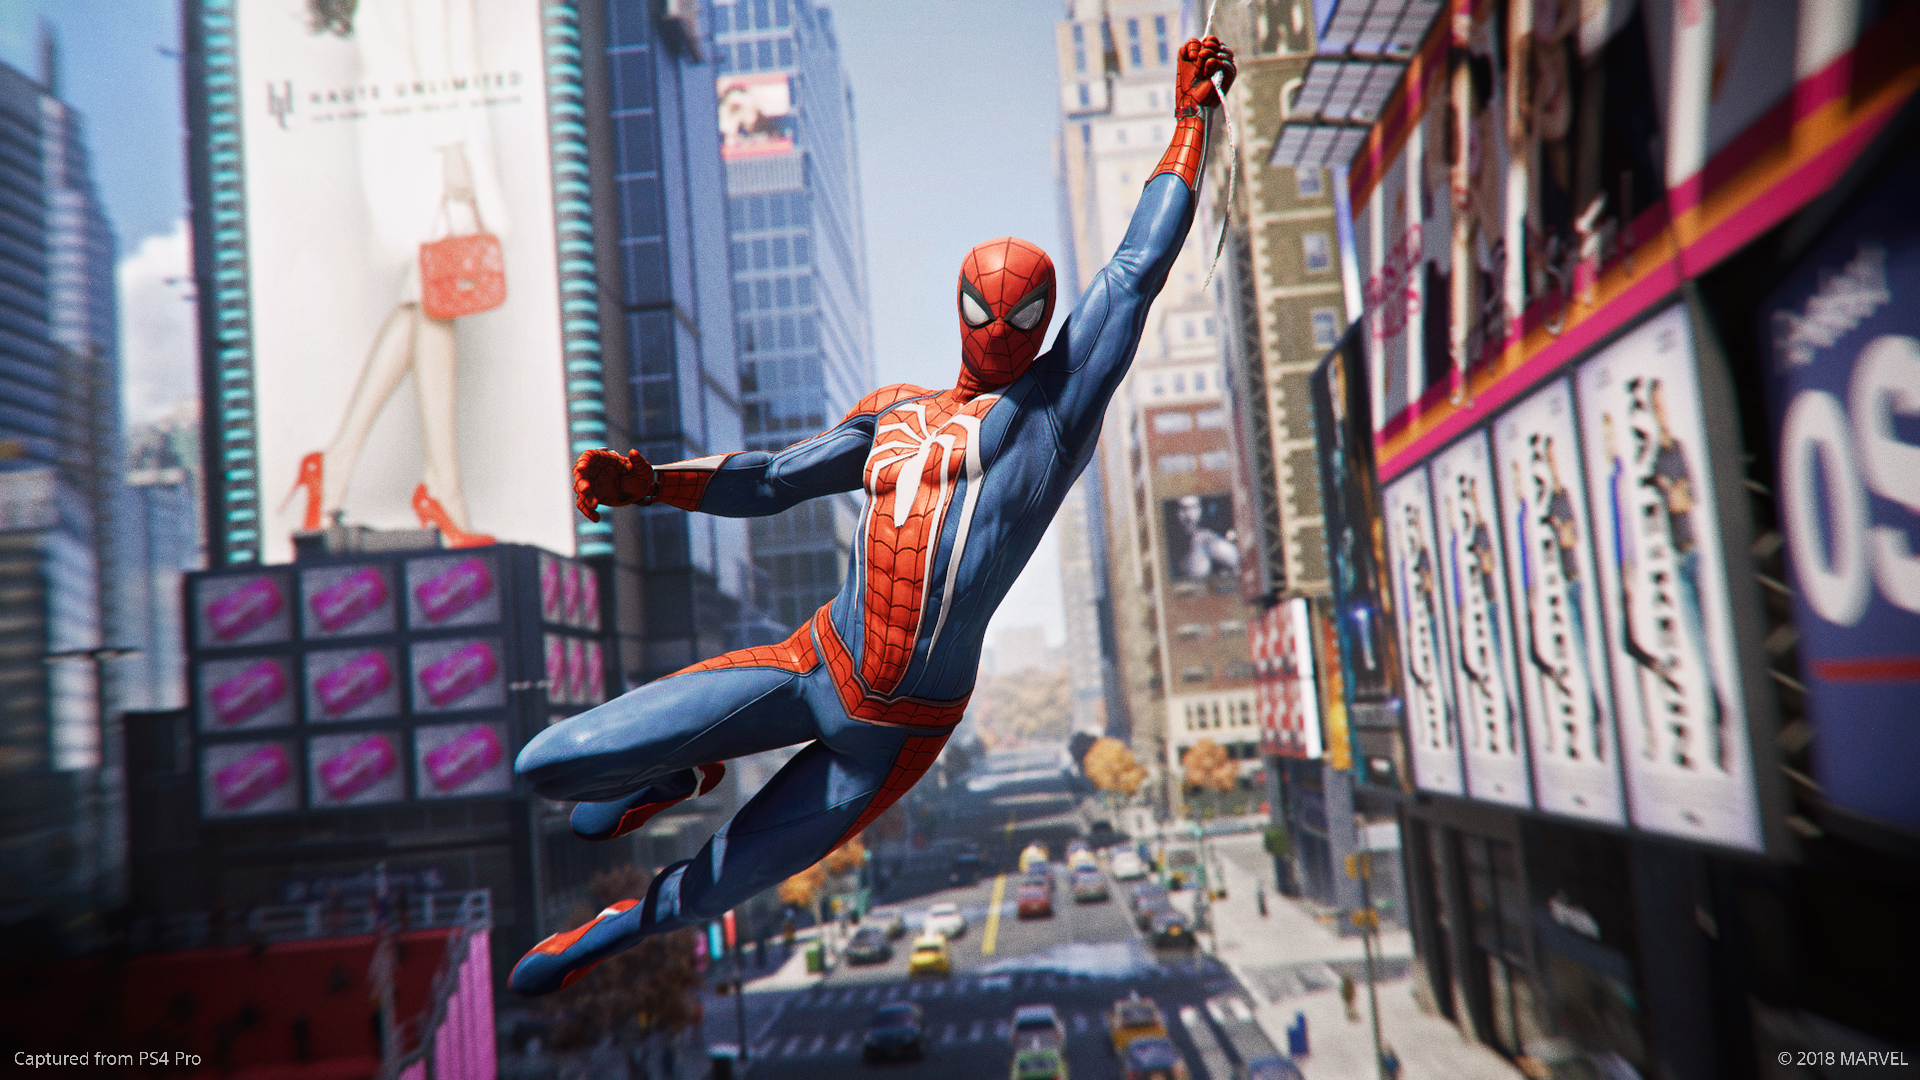 Action, adventure, Comic Book, Insomniac Games, Marvel’s Spider-Man, Marvel’s Spider-Man Review, PS4, PS4 Review, Rating 9/10, Sony, Sony Interactive Entertainment Europe, Spider-Man